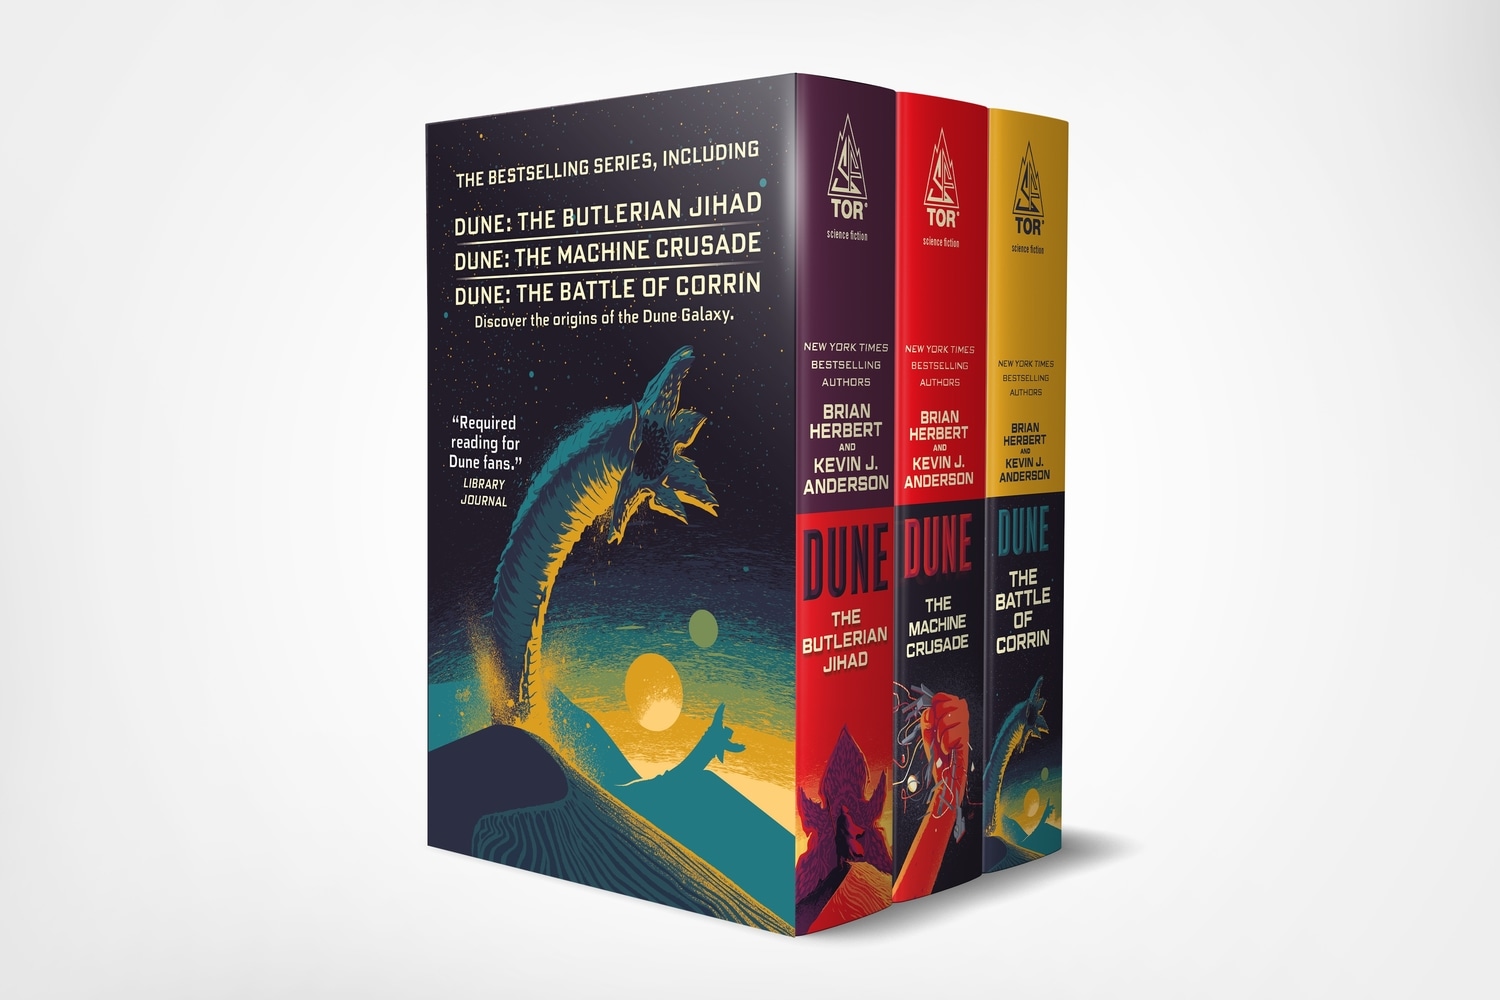 Book “Legends of Dune Mass Market Paperback Boxed Set” by Brian Herbert, Kevin J. Anderson — August 27, 2019